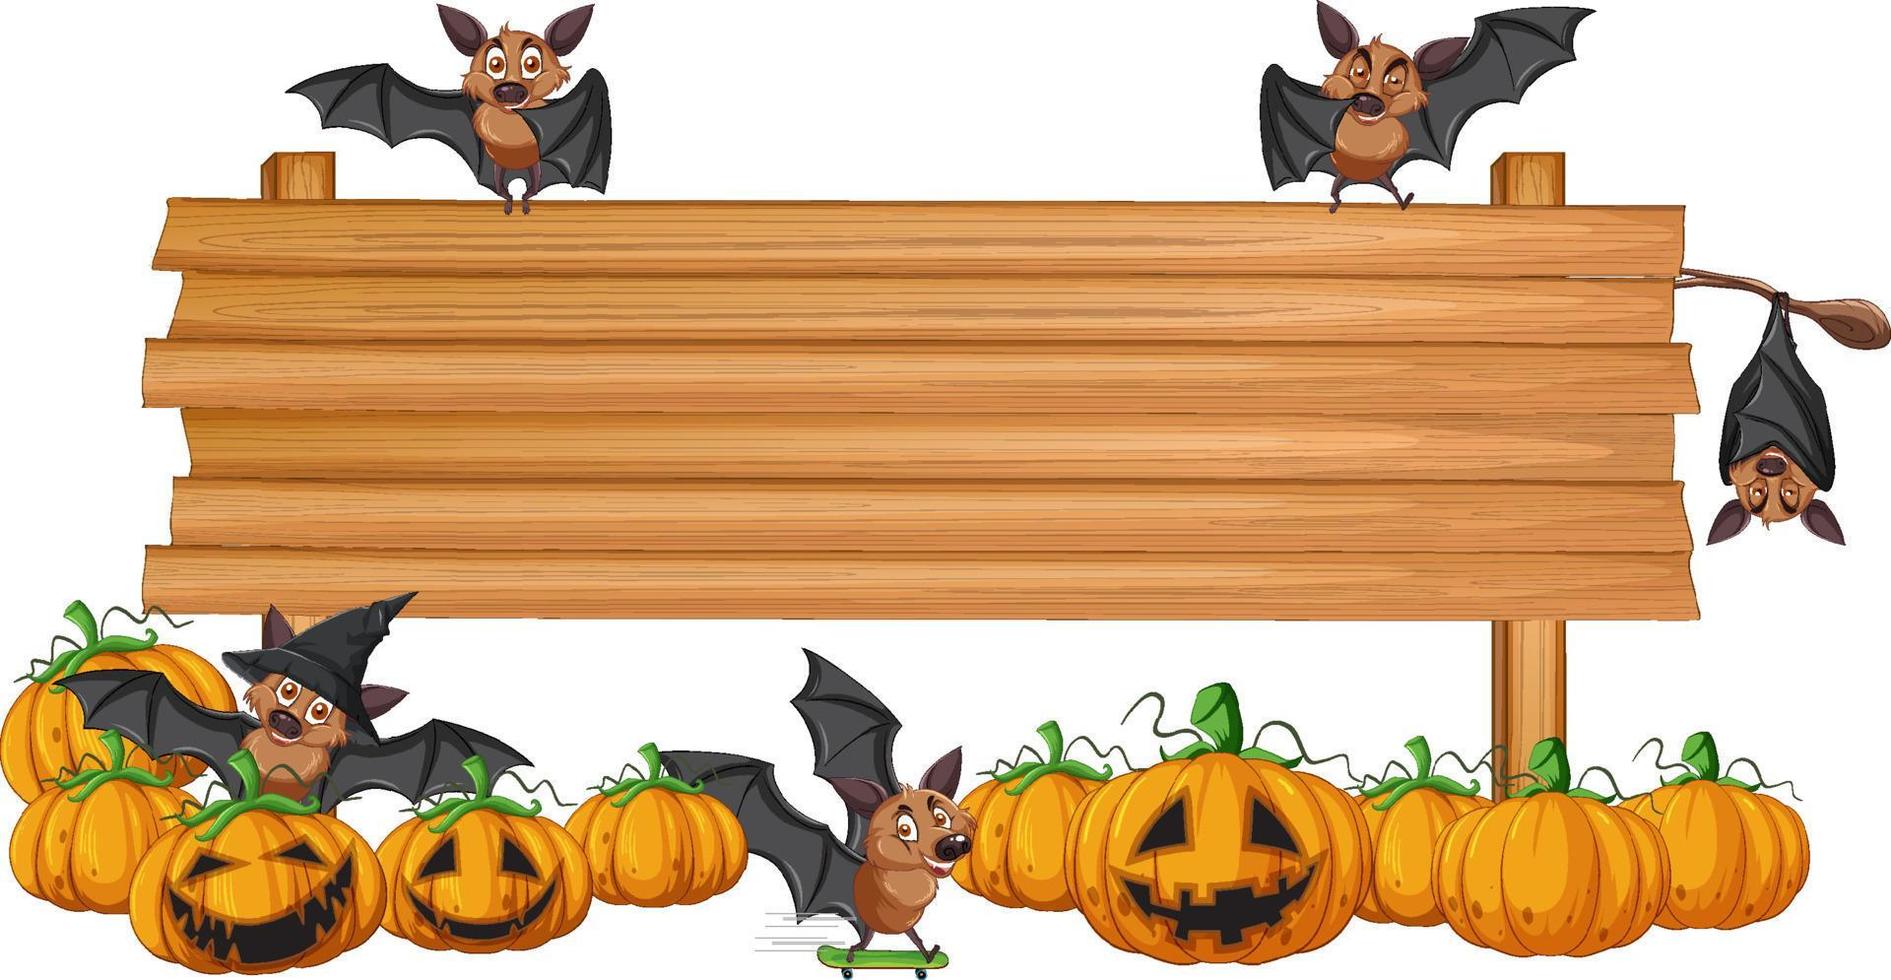 Many bat with wooden sign banner vector